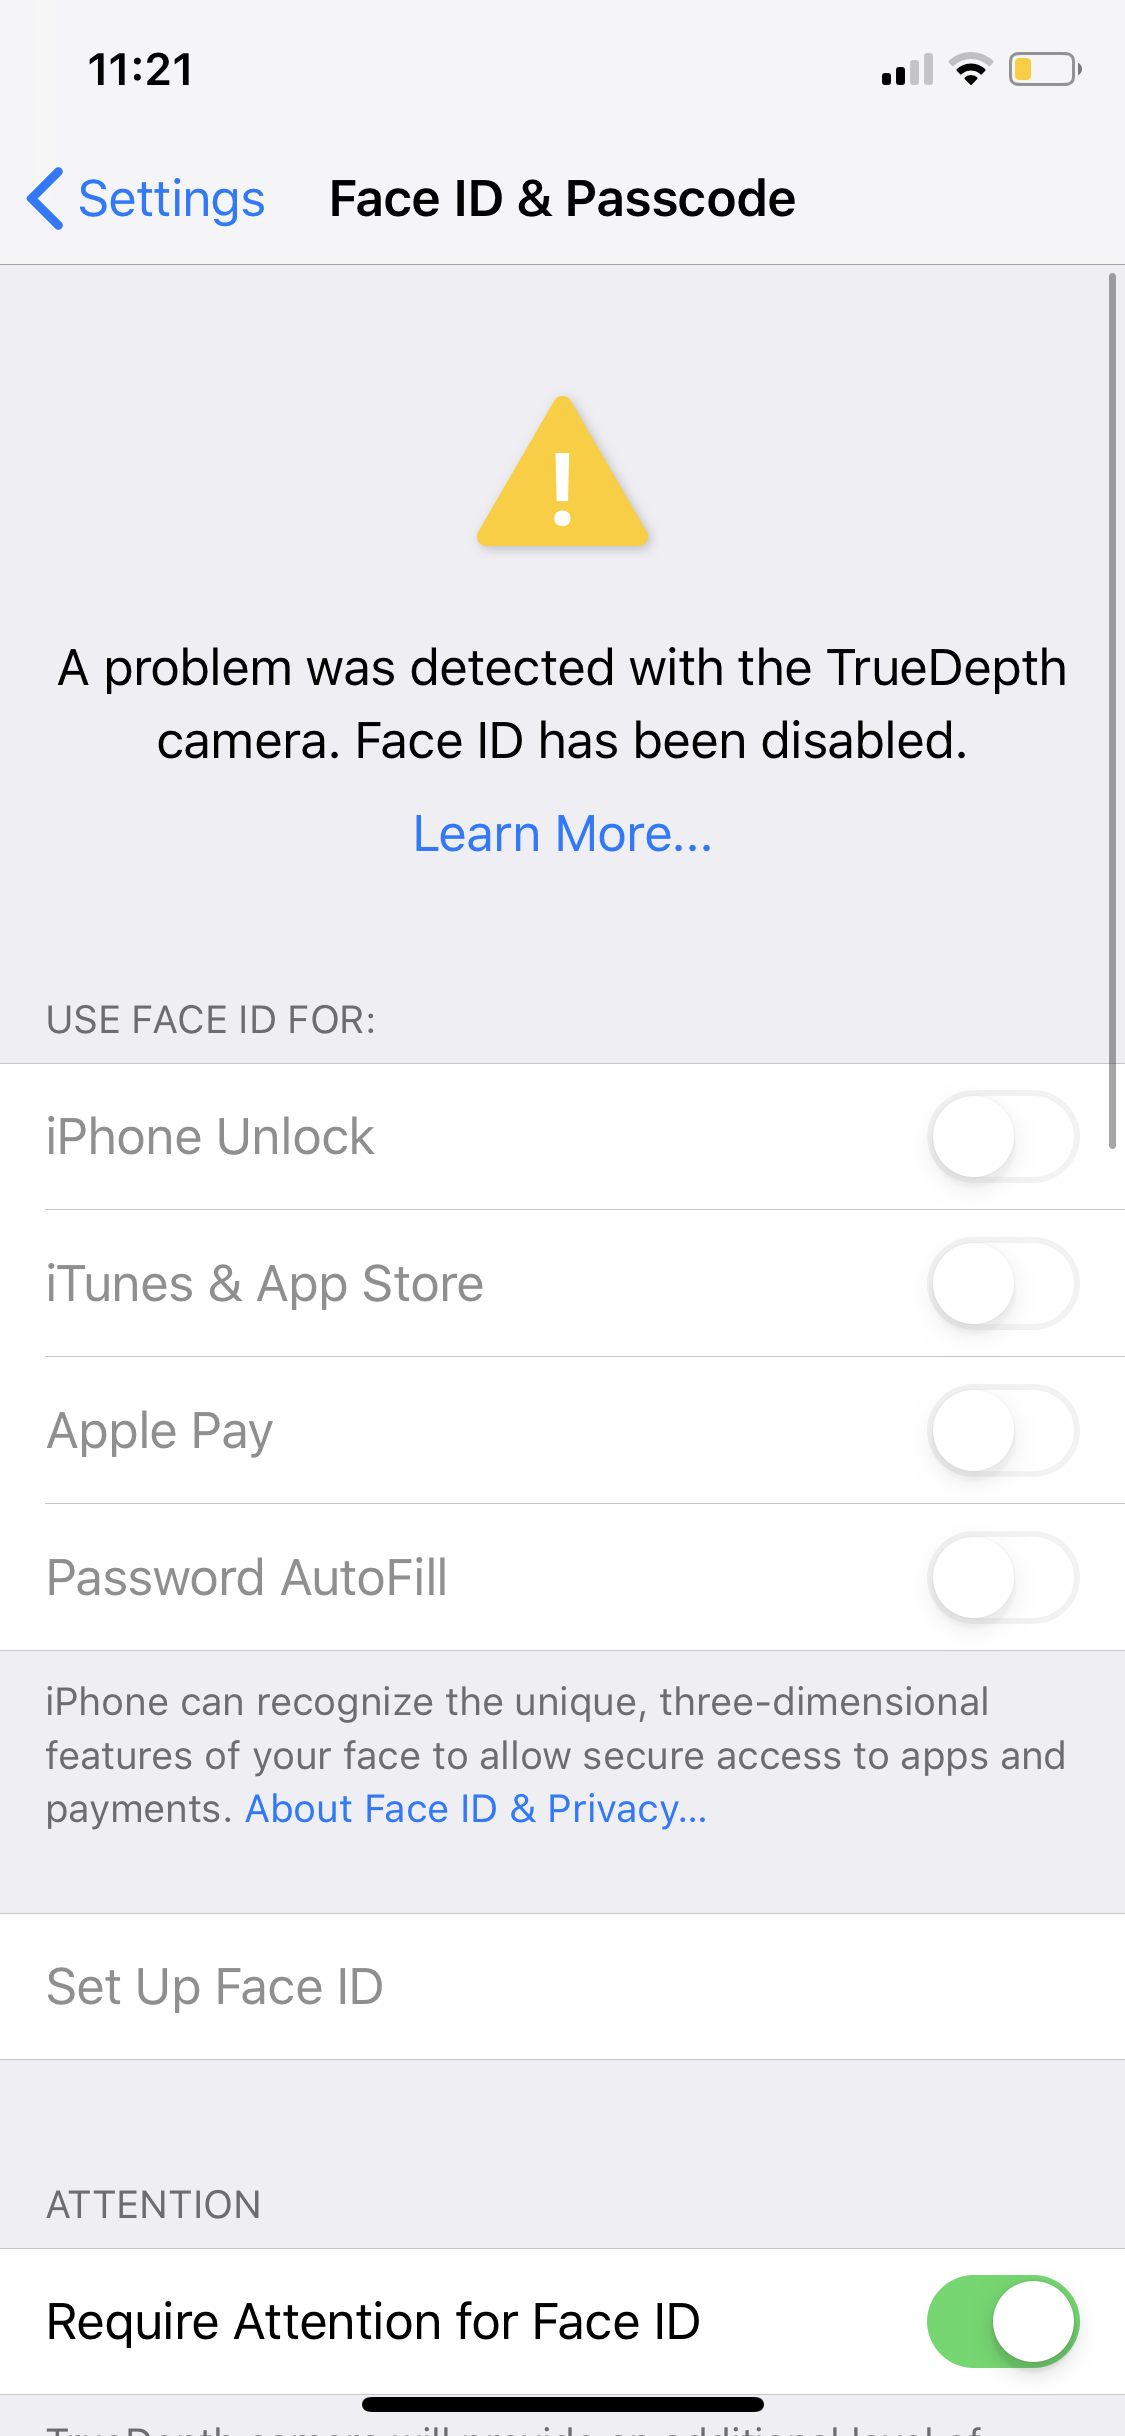 Is it expensive to fix Face ID?